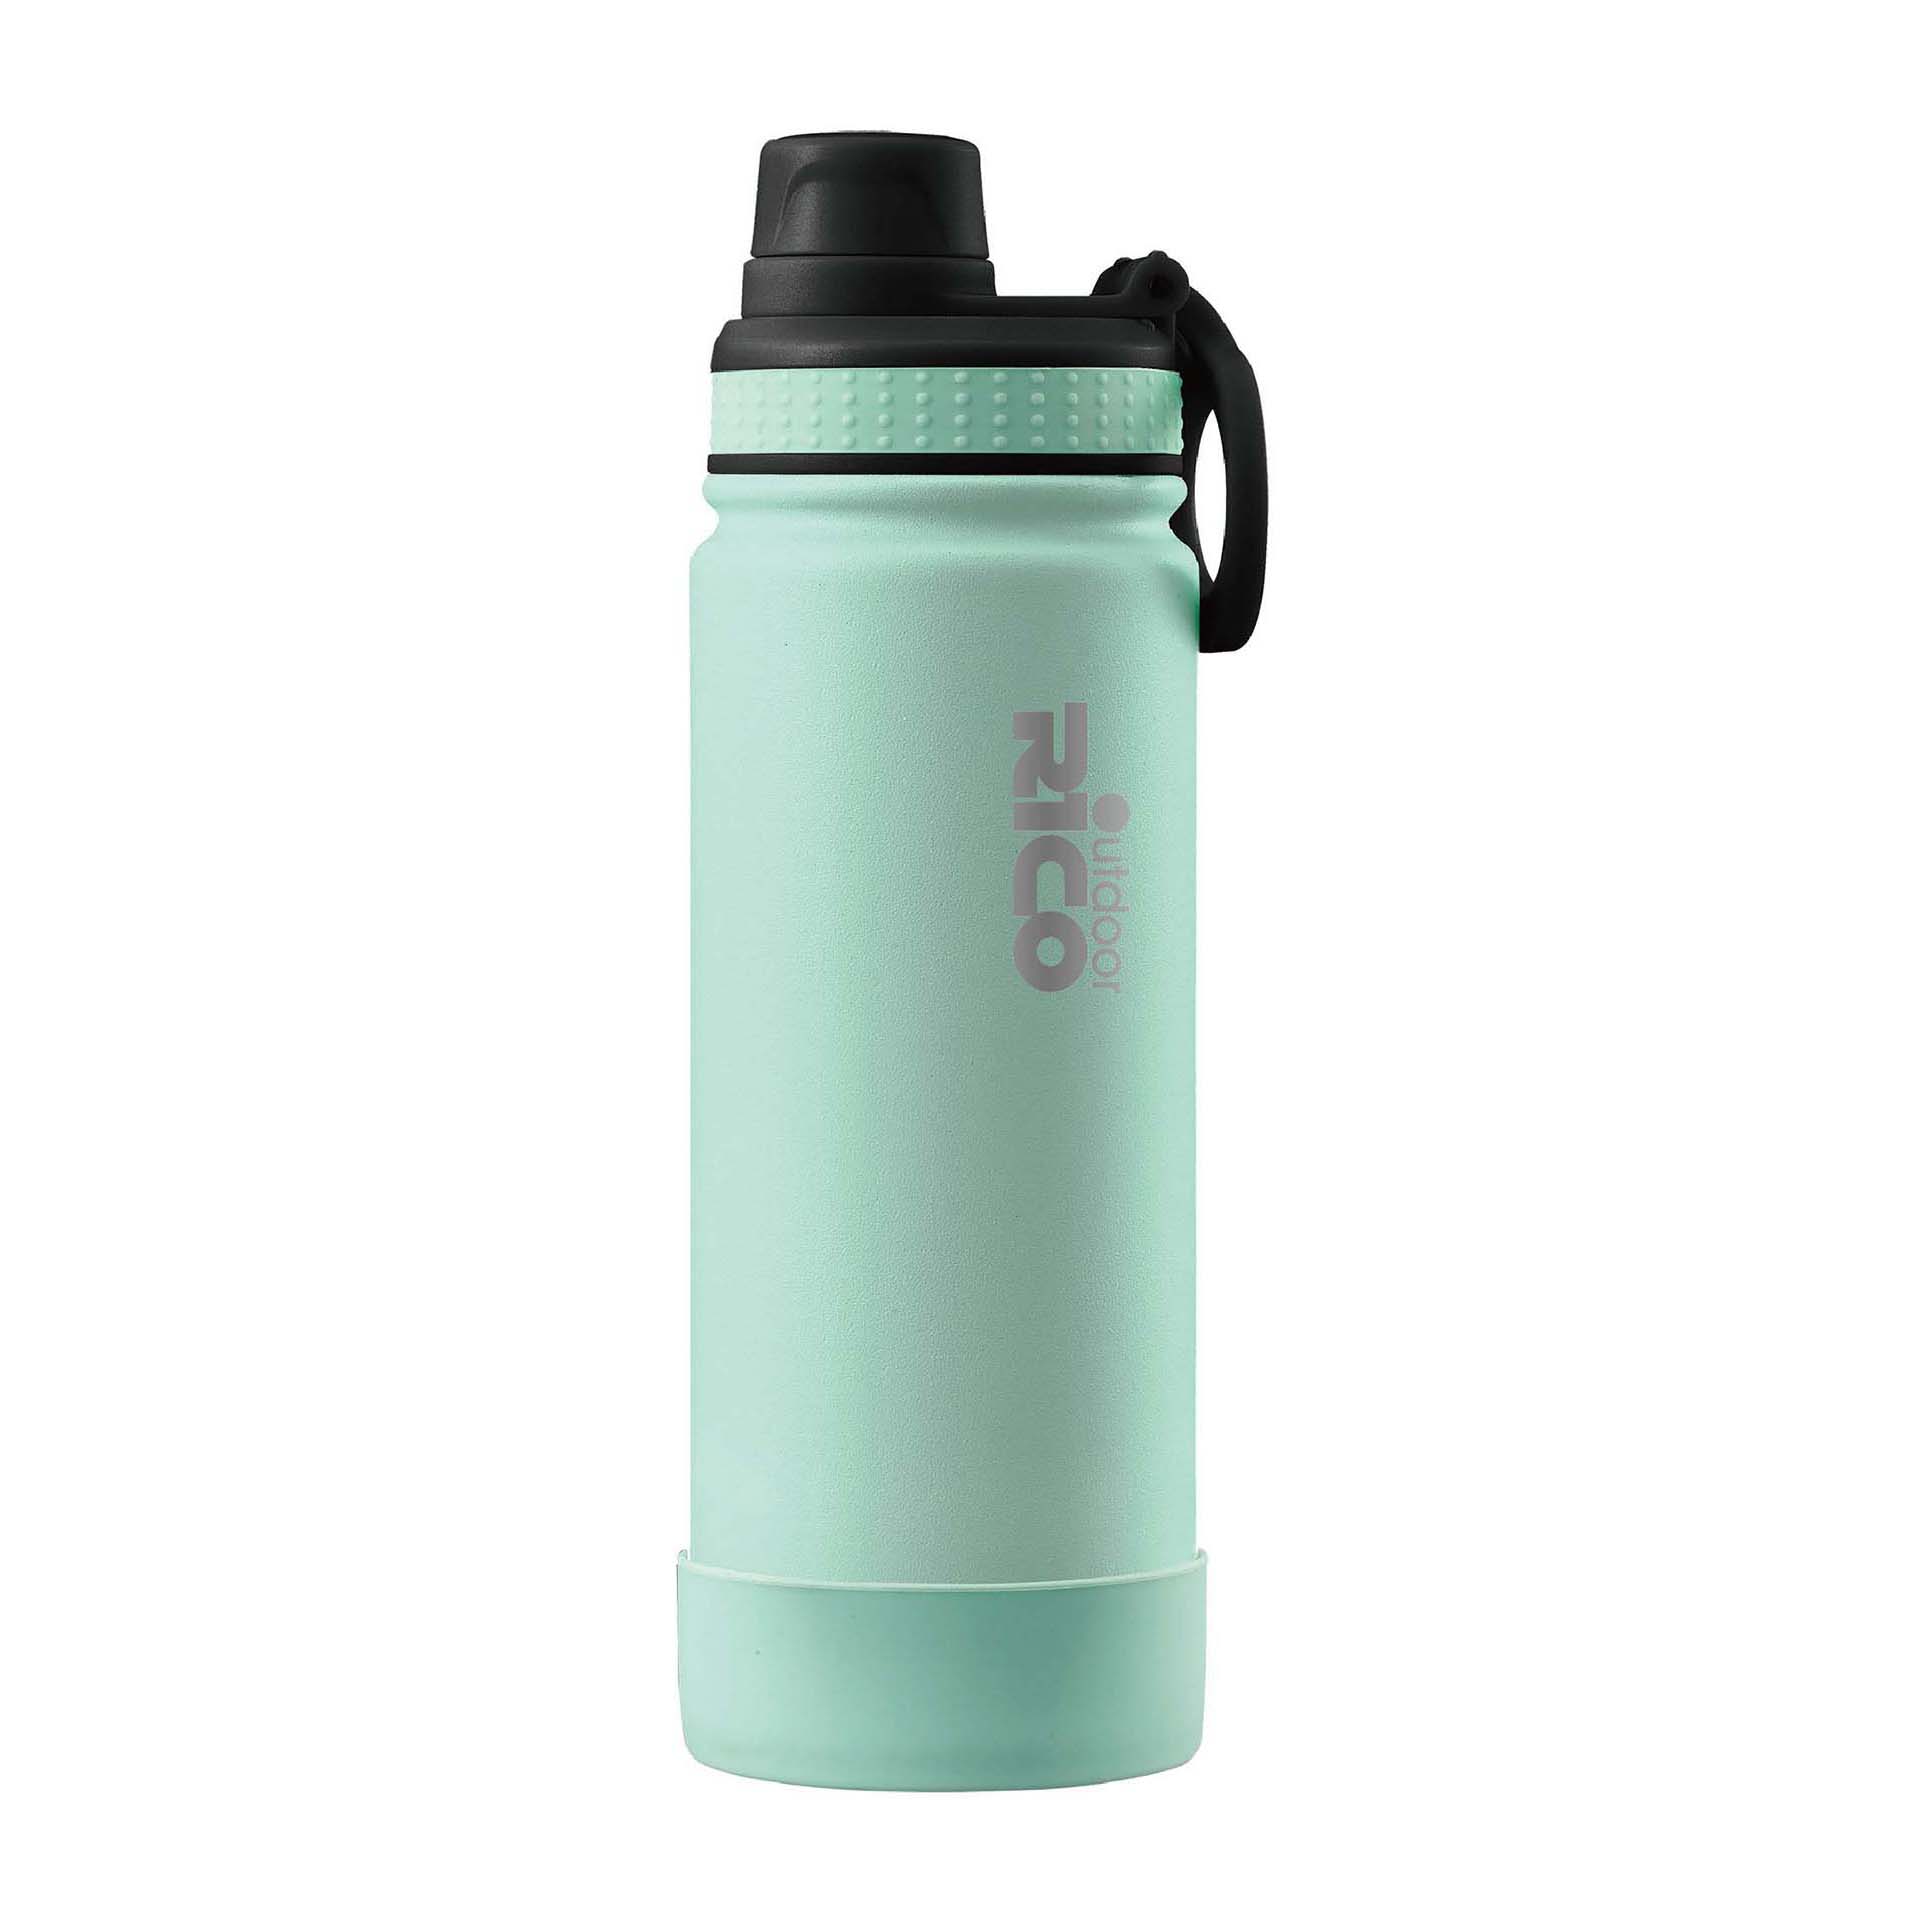 Carry Stainless Steel Vacuum Sports Bottle